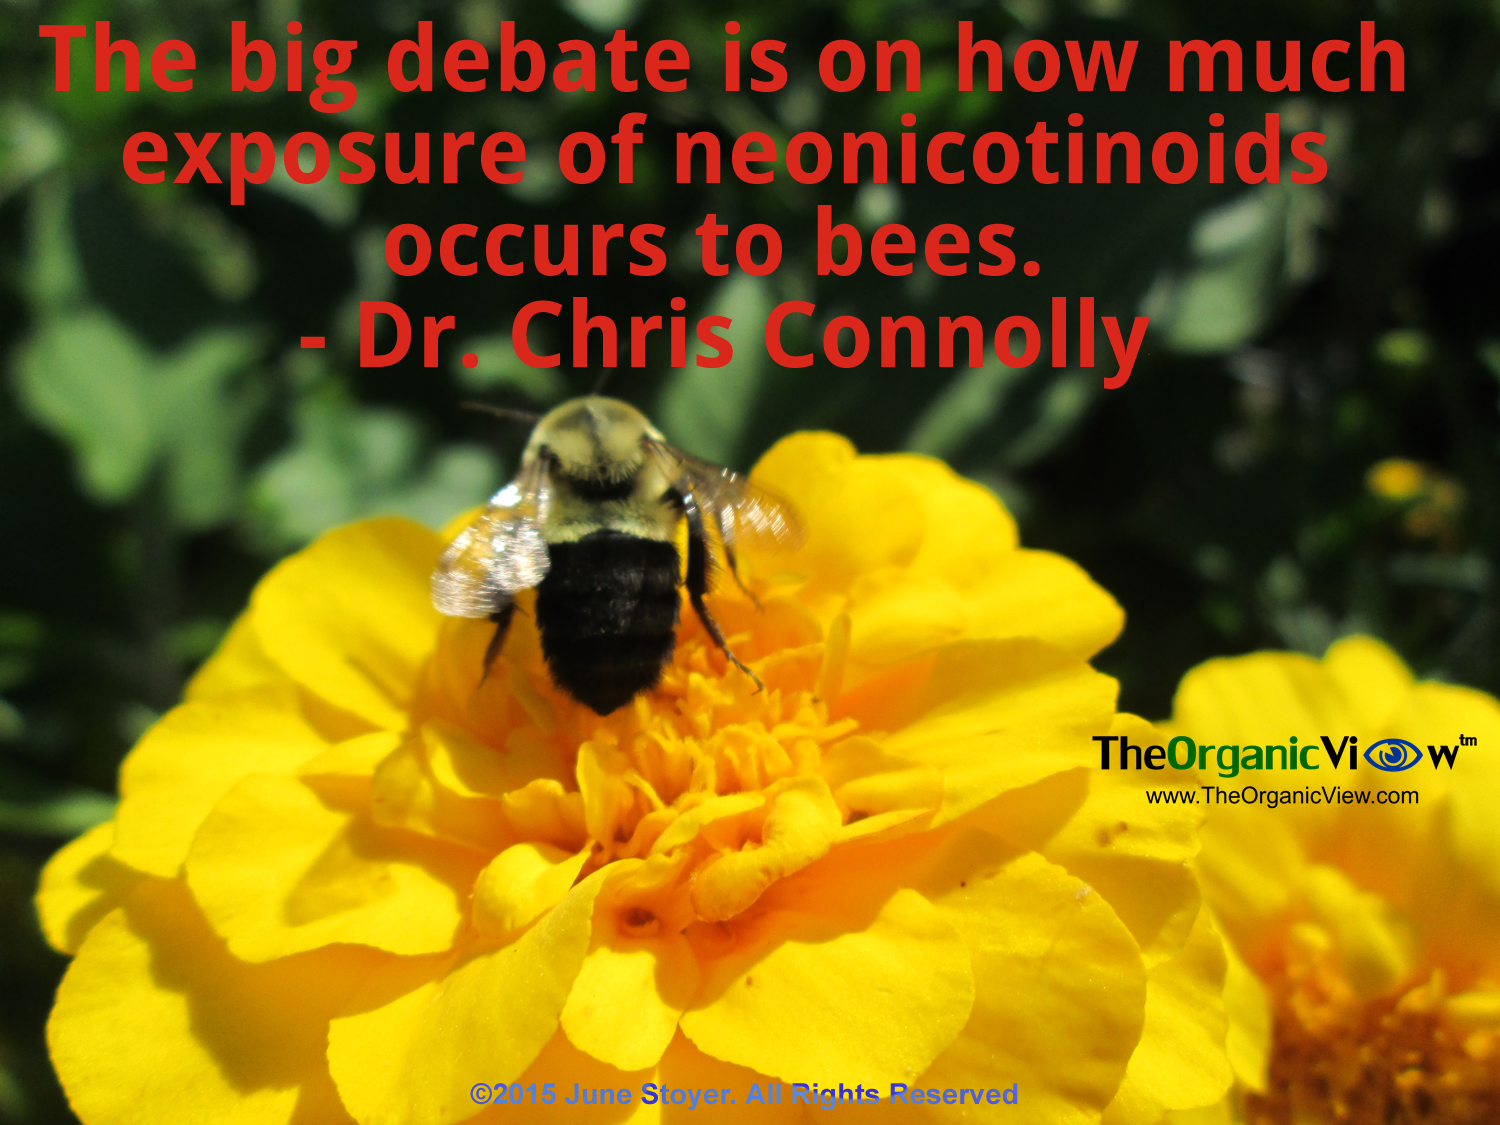 The big debate is on how much exposure of neonicotinoids occurs to bees. Dr Chris Connolly